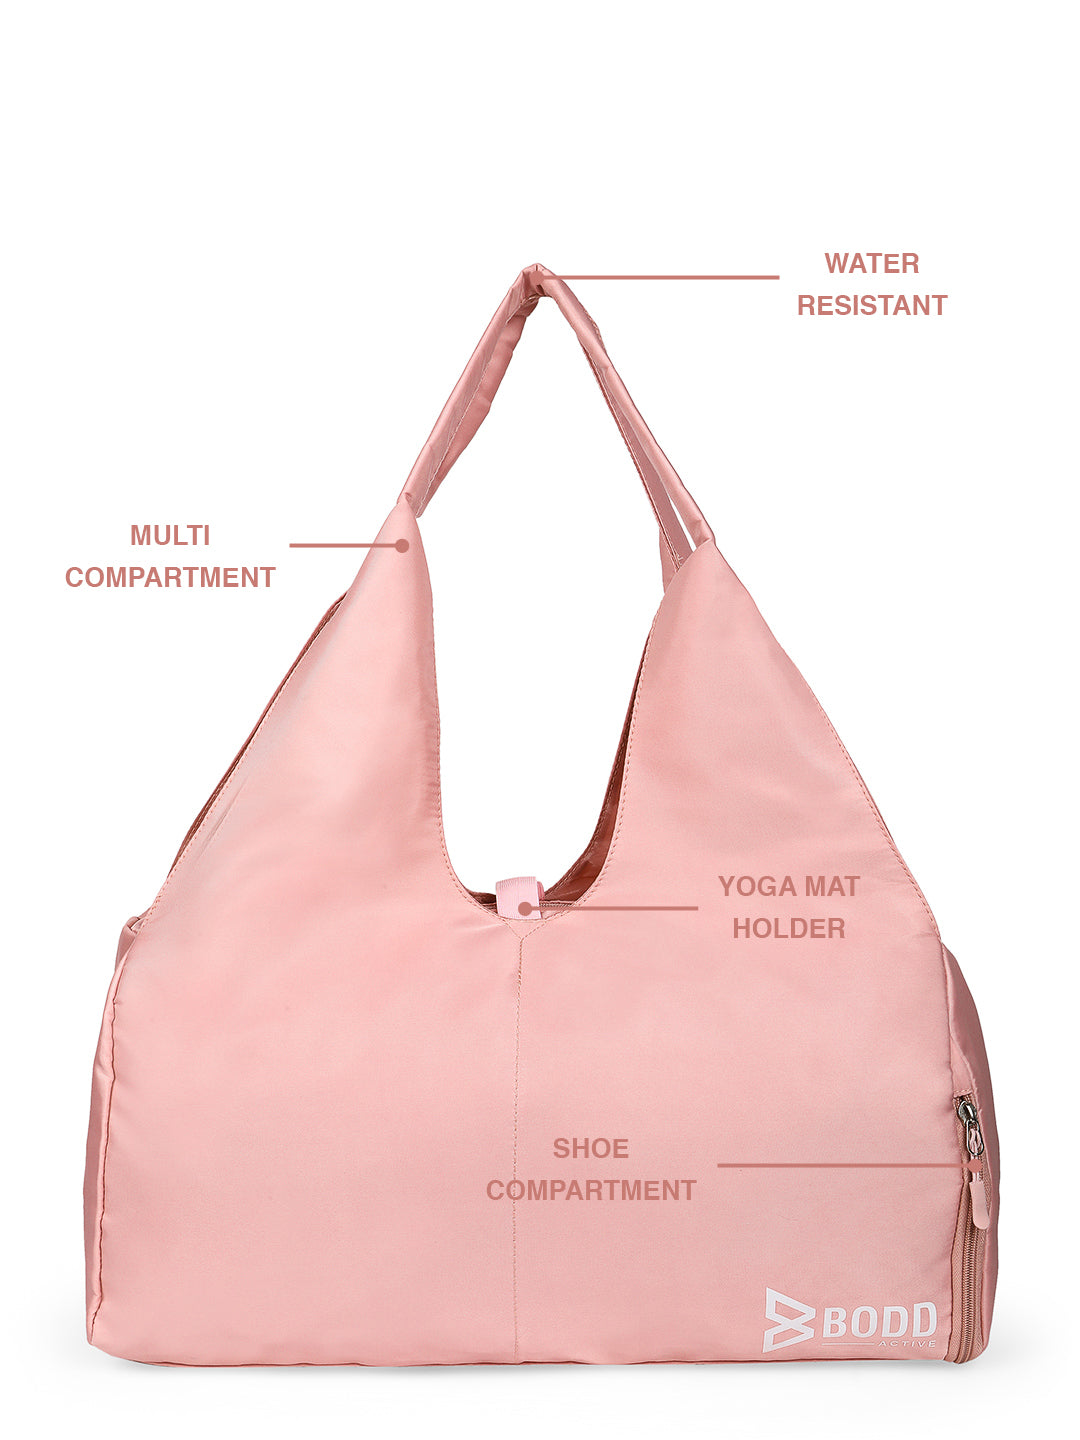 Looking Pretty Everyday Pink Bag BODD ACTIVE